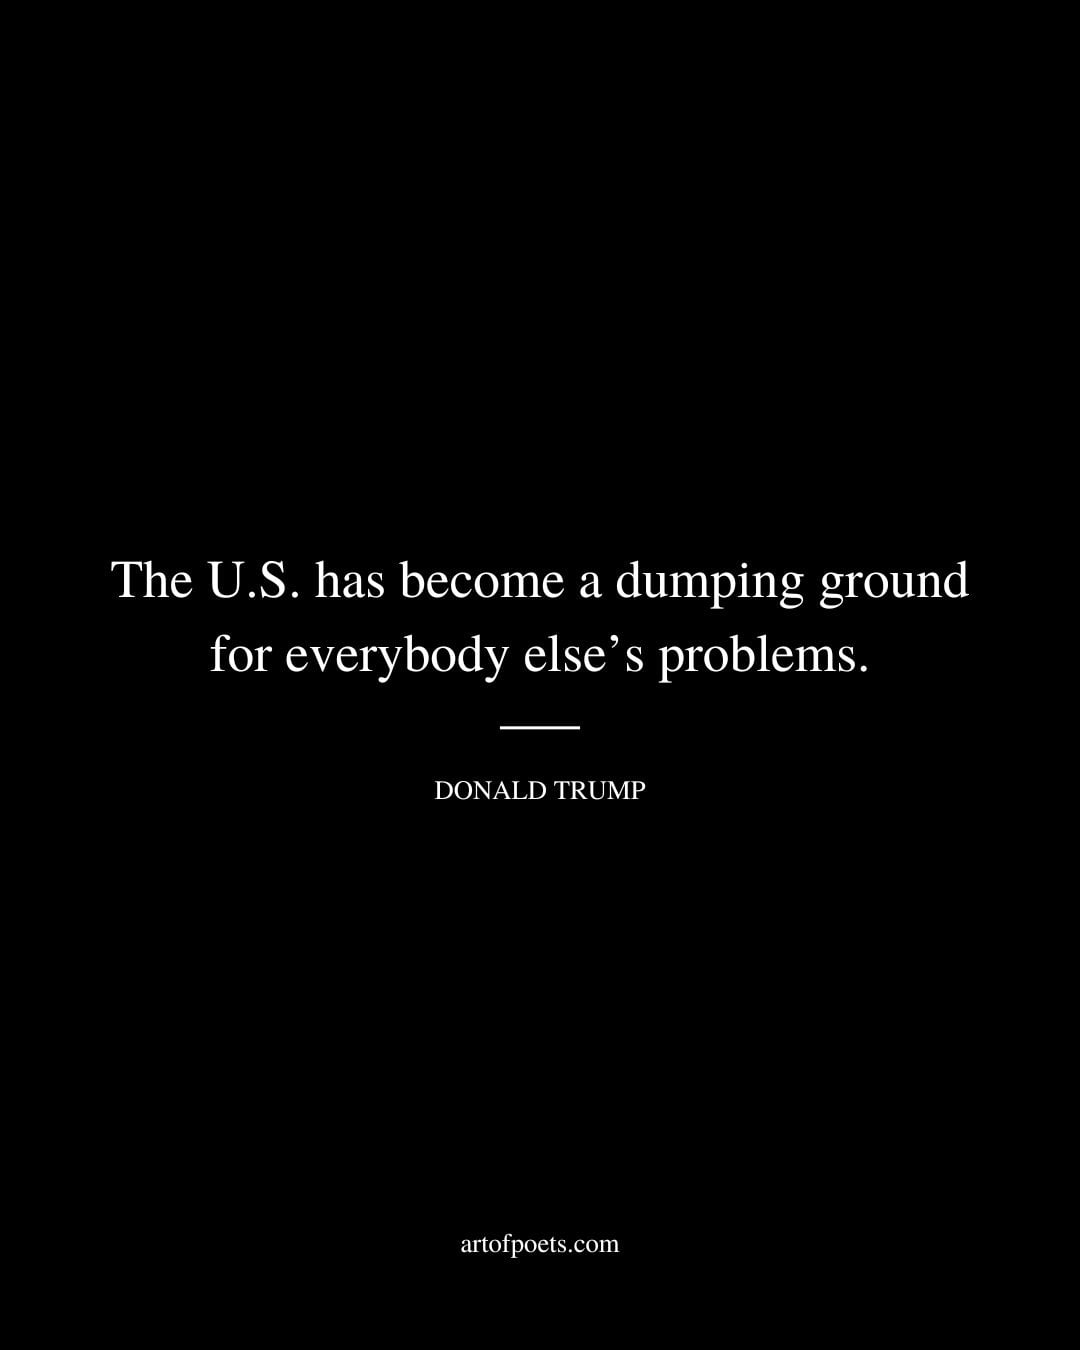 The U.S. has become a dumping ground for everybody elses problems